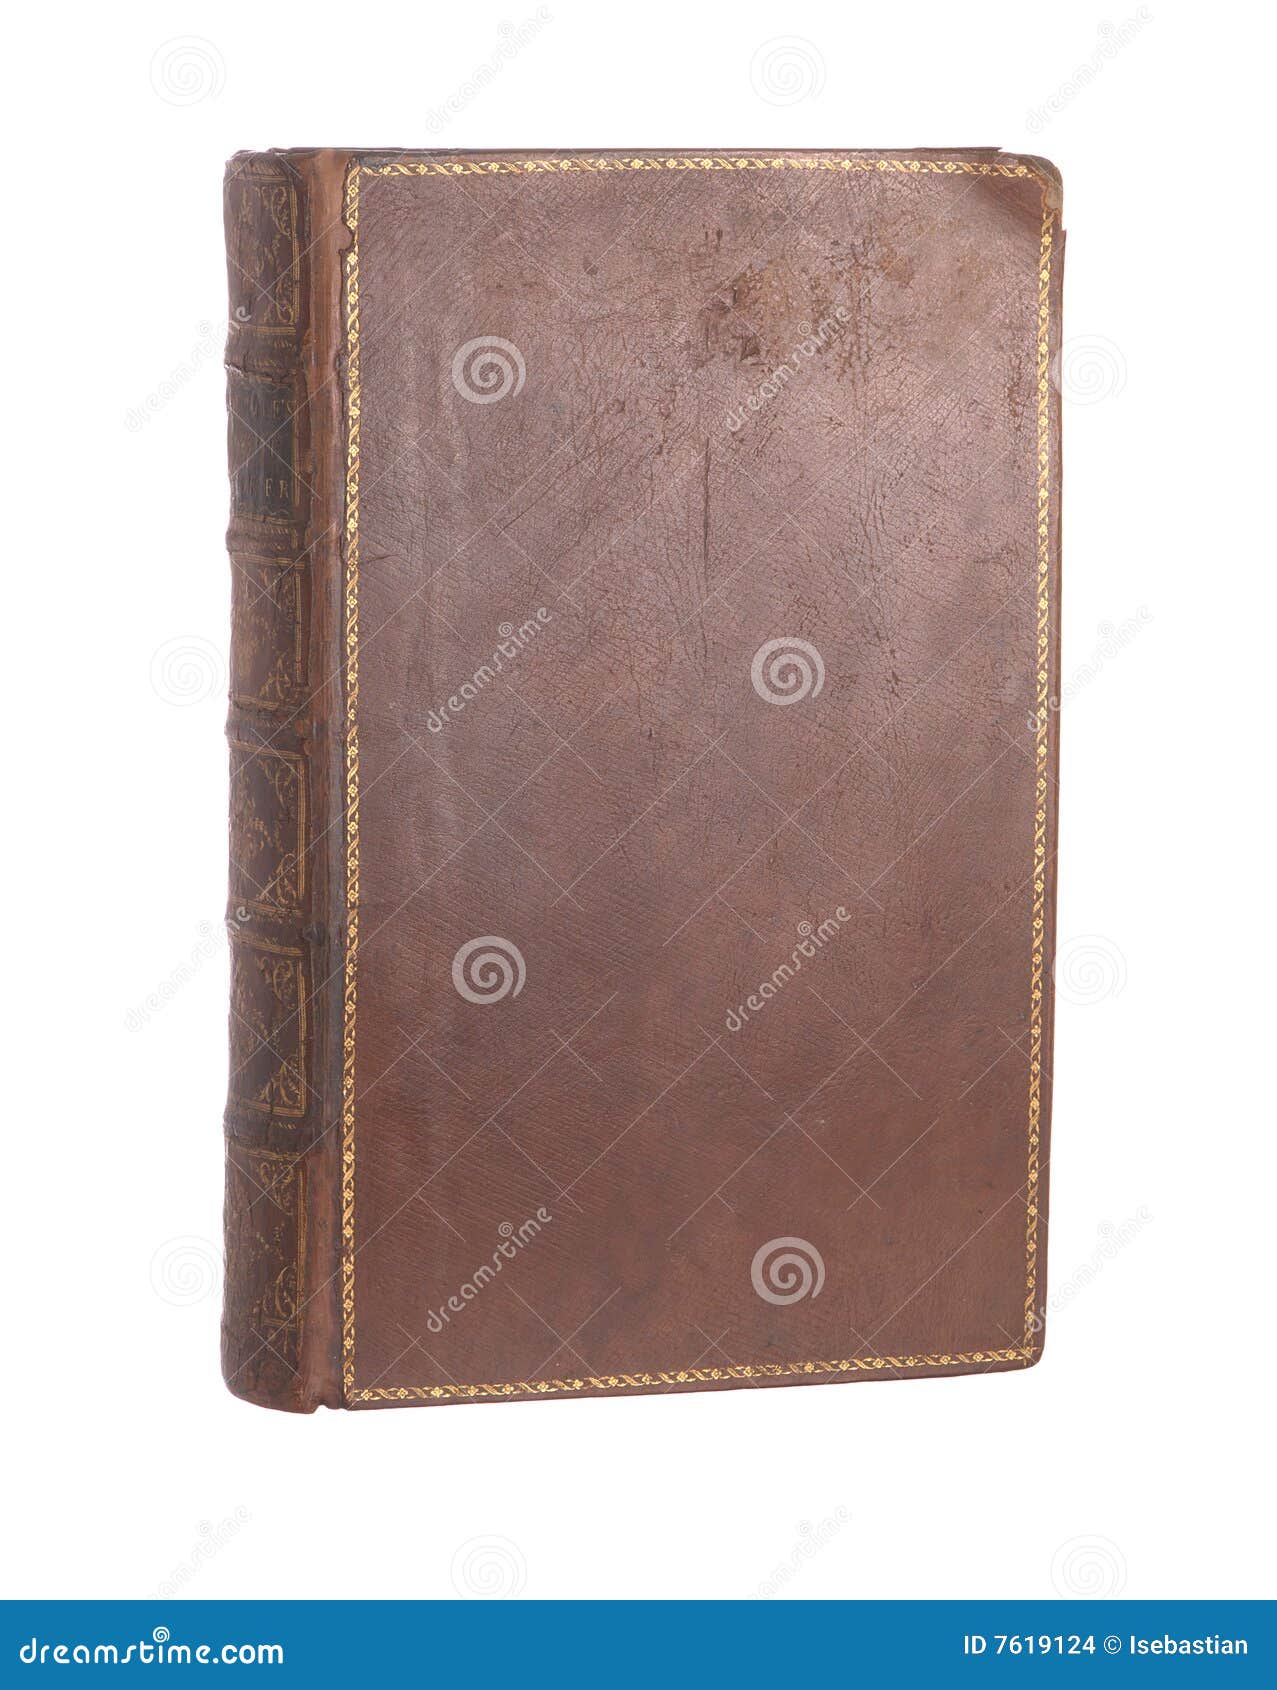 single old leather bound book